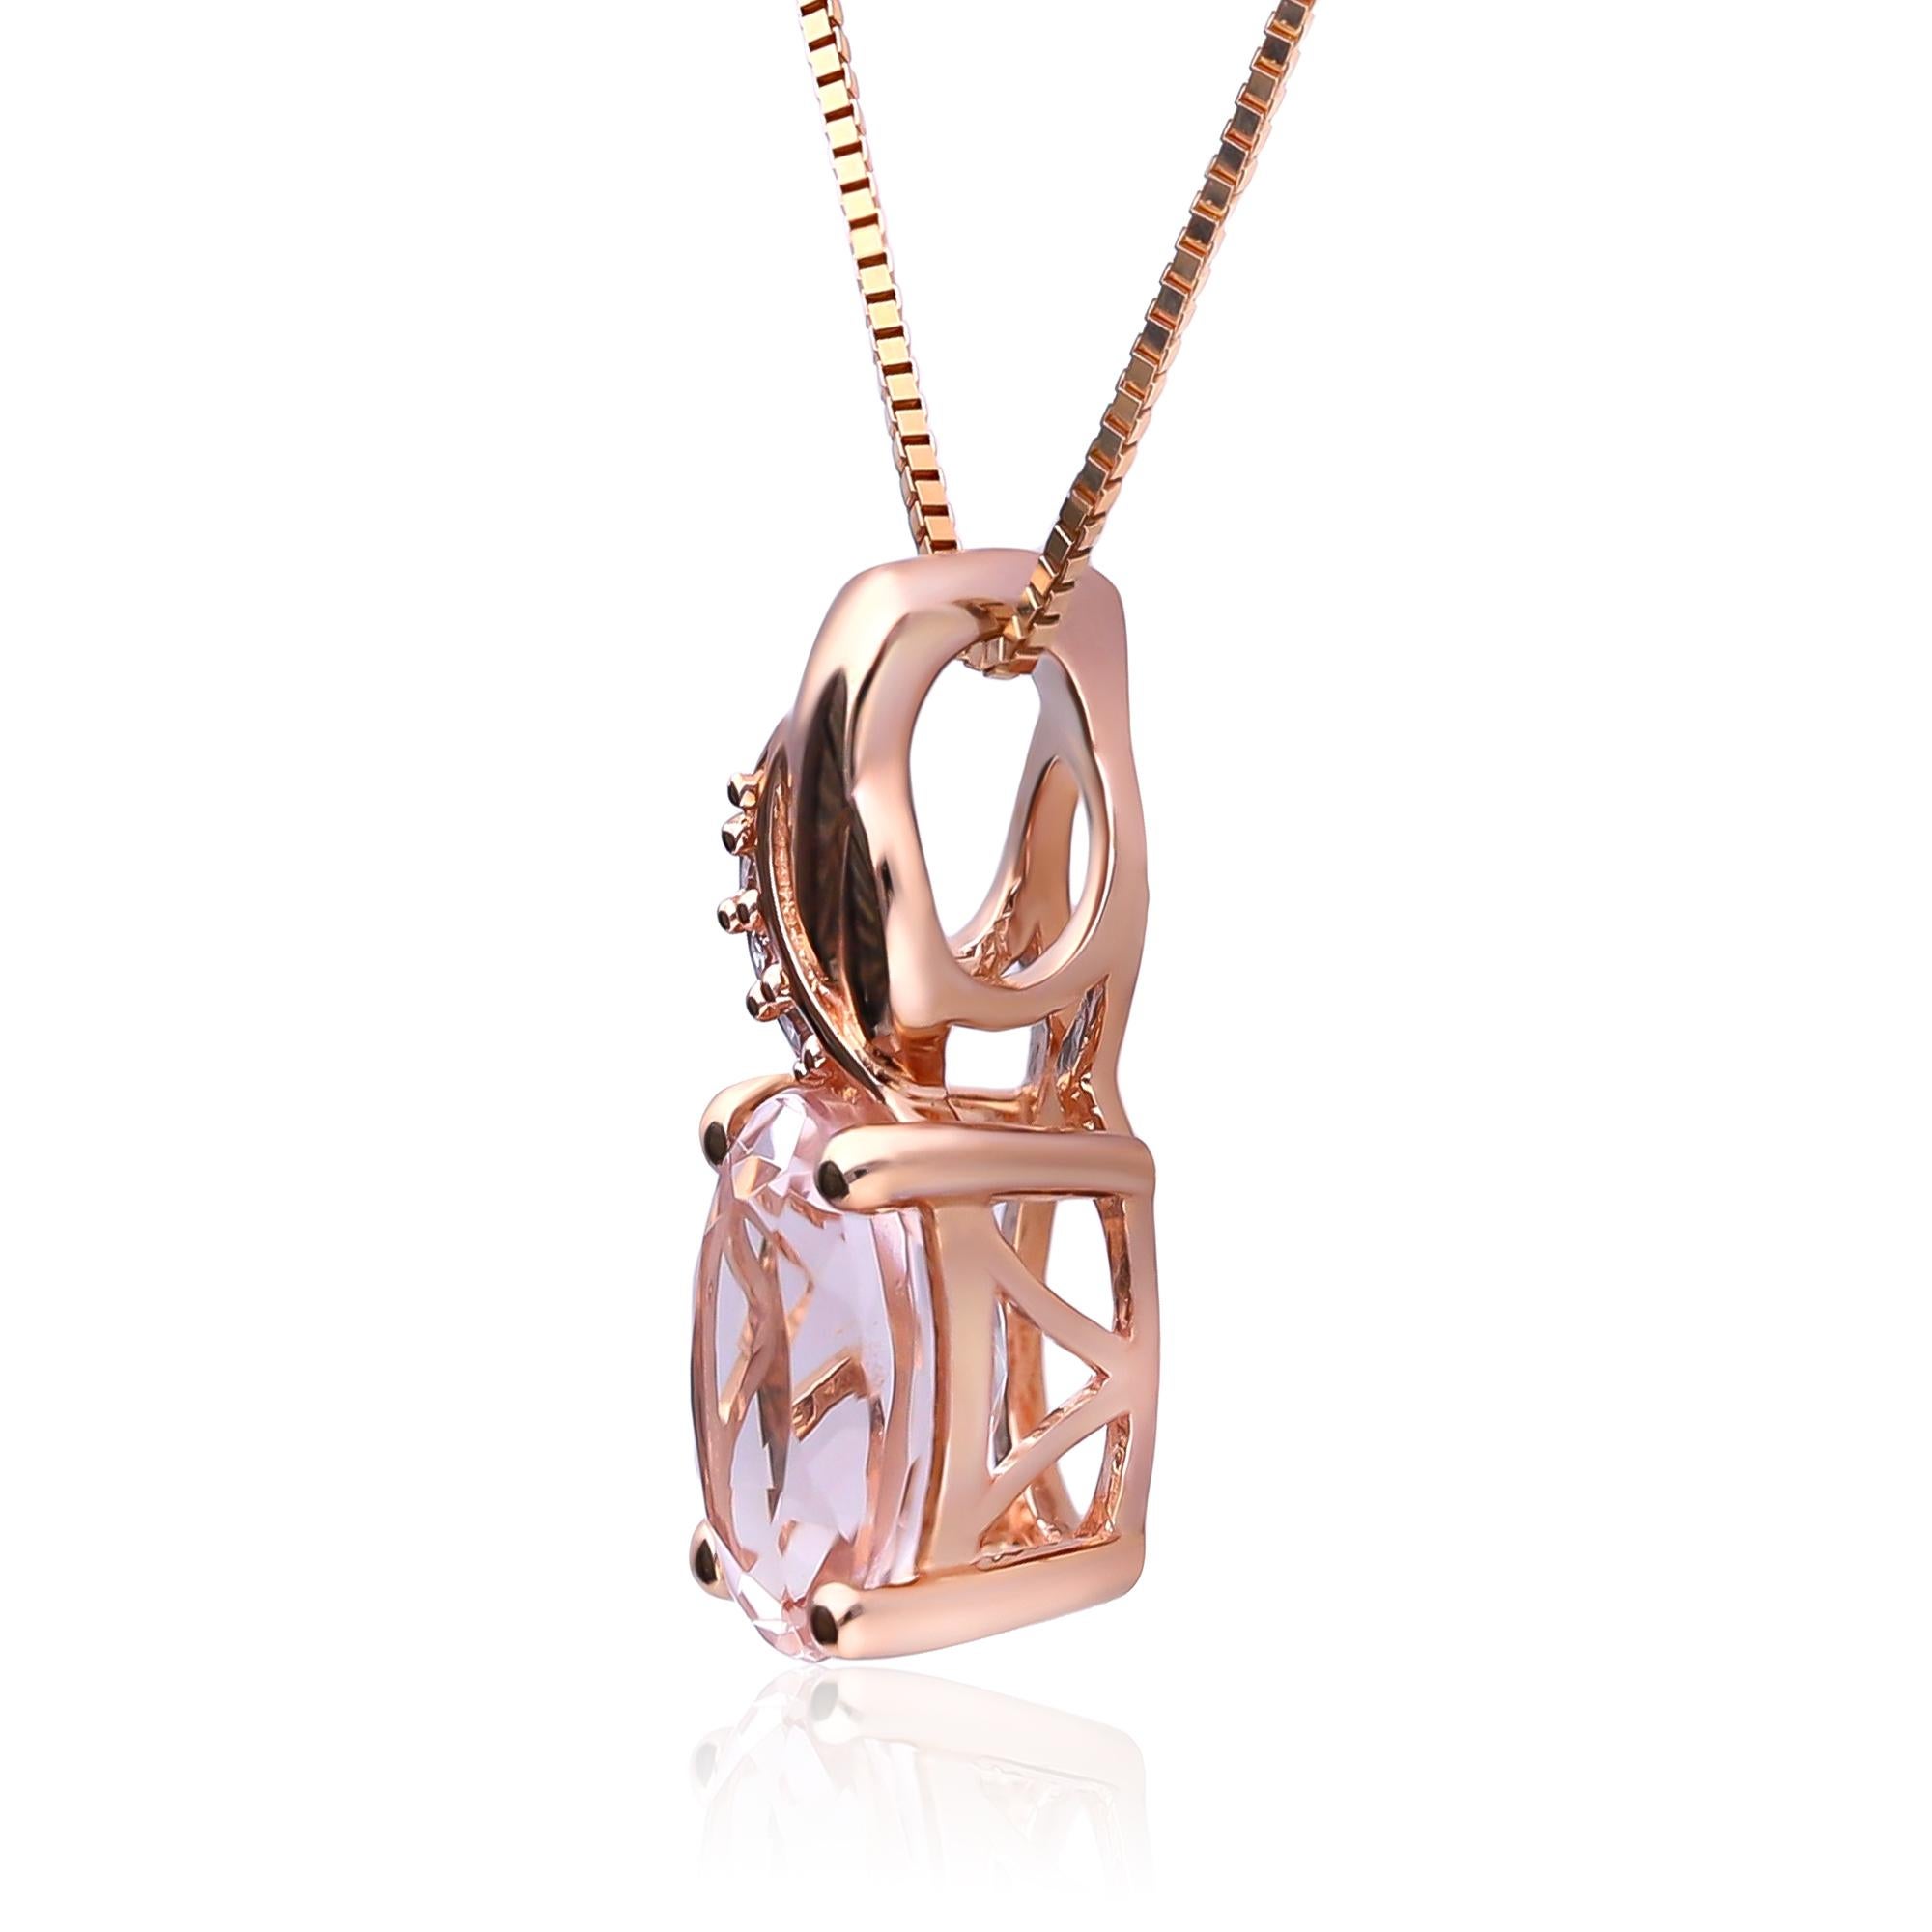 Decorate yourself in elegance with this Pendant is crafted from 10-karat Rose Gold by Gin & Grace Pendant. This Pendant is made up of 6X8 Oval-Cut Prong setting Genuine Morganite (1 Pcs) 1.20 Carat and Round-Cut Prong setting Natural White Diamond